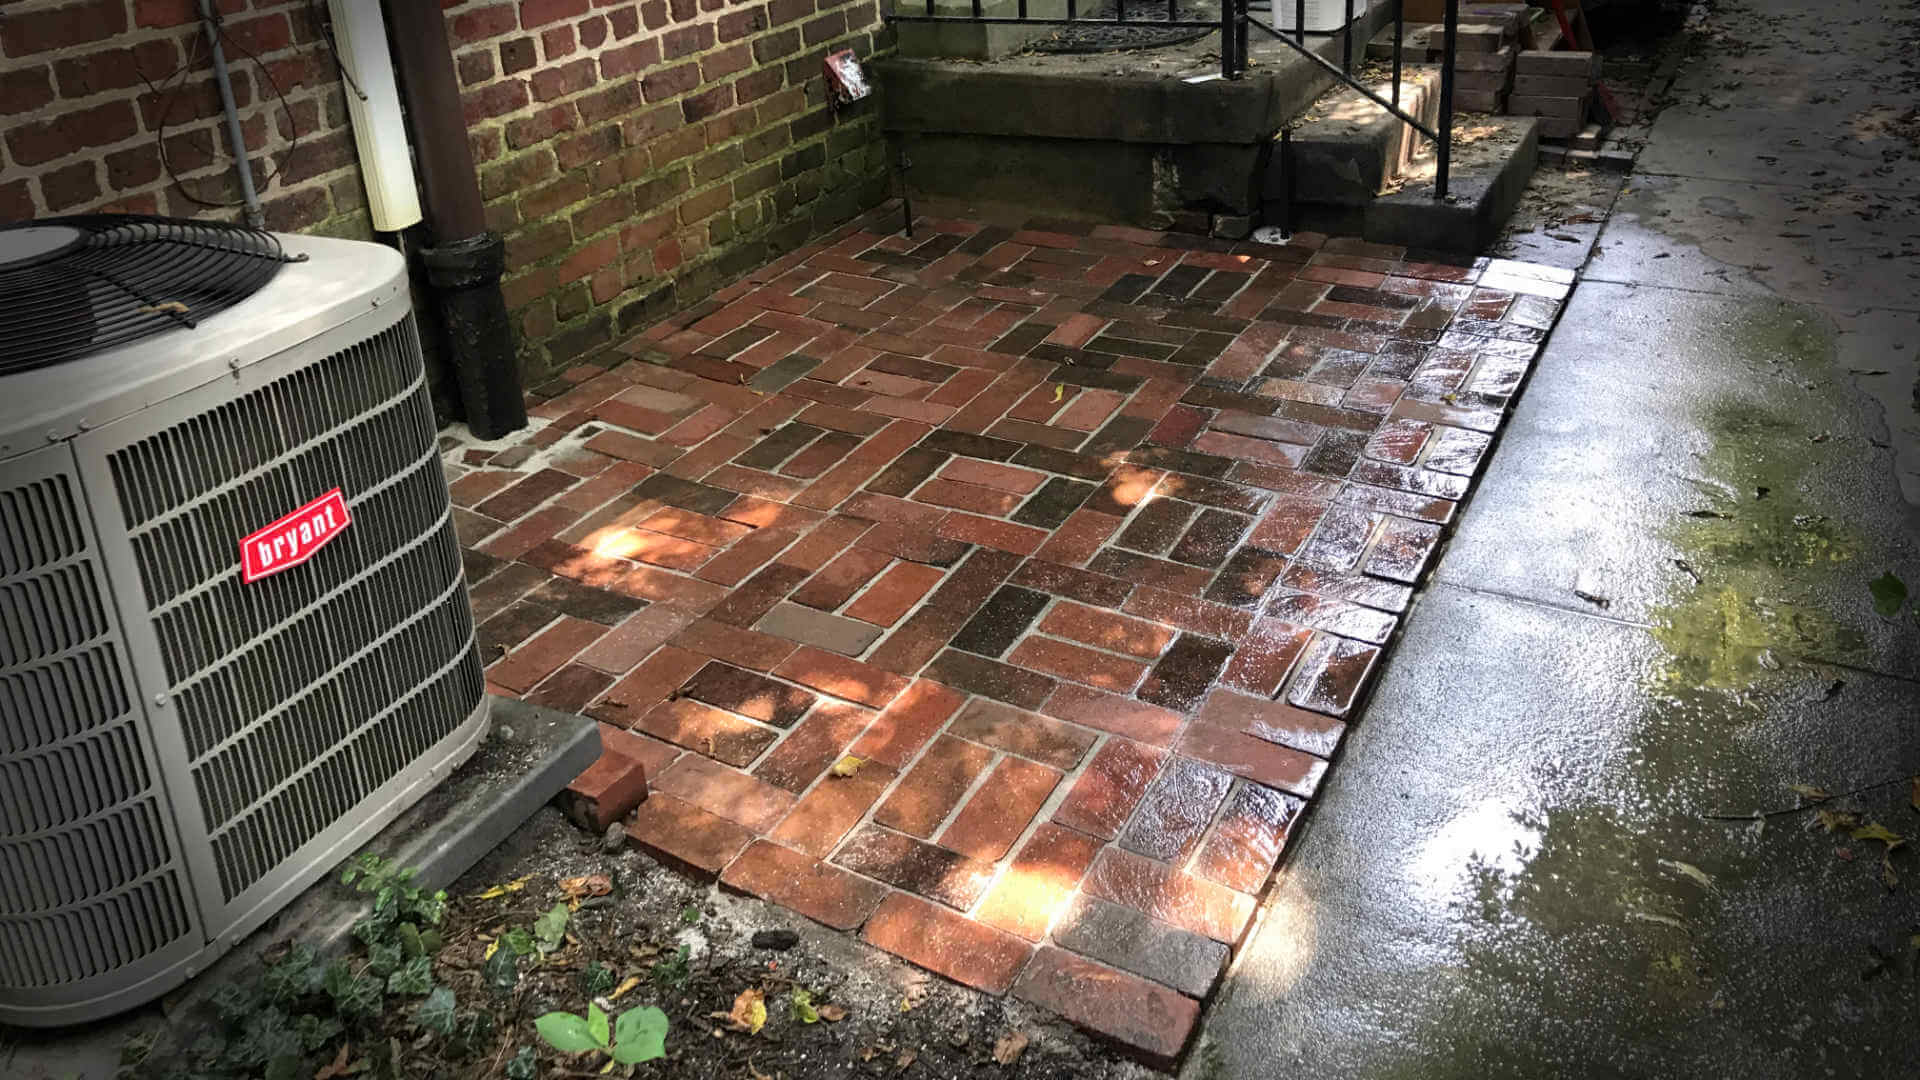 Success! I conquered my fear of DIY projects with this brick patio regrading.